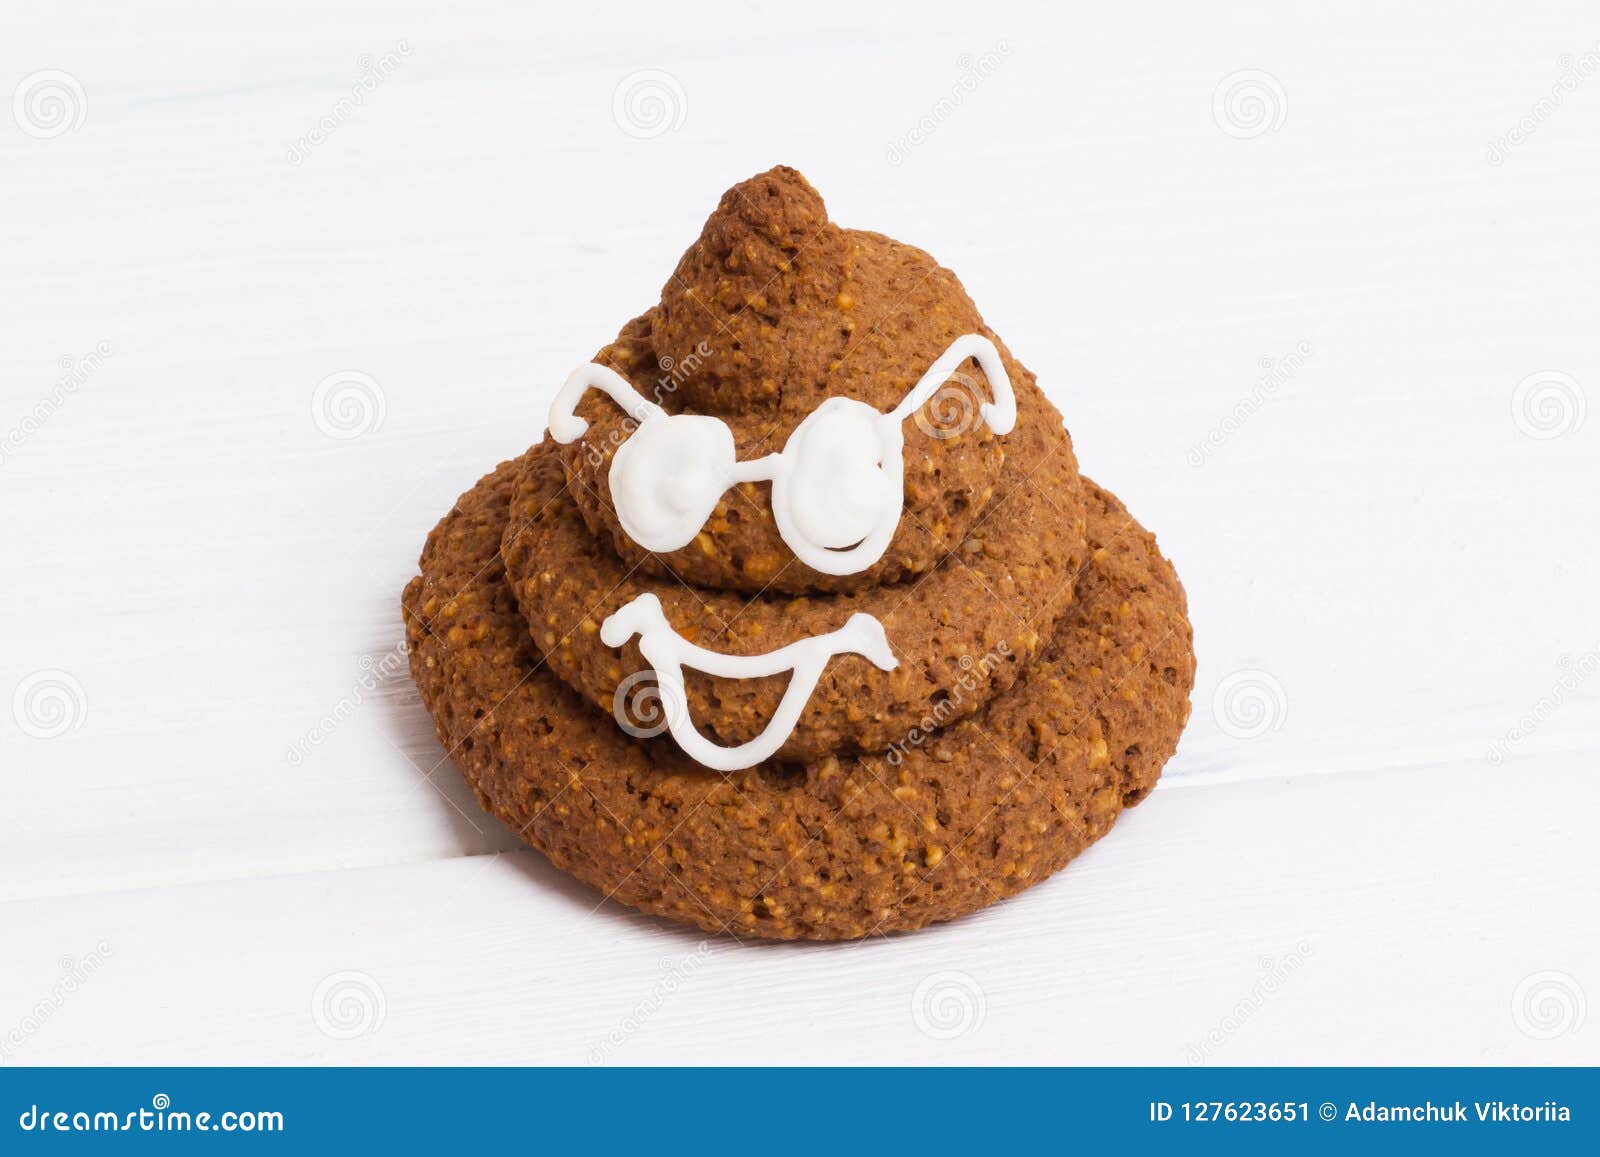 Funny Poop Emoji Chocolate Cookie with White Decor and Glasses. Cute Food  Dessert. Free Place for Text. Copyspace. Closedup Stock Image - Image of  celebration, emotion: 127623651